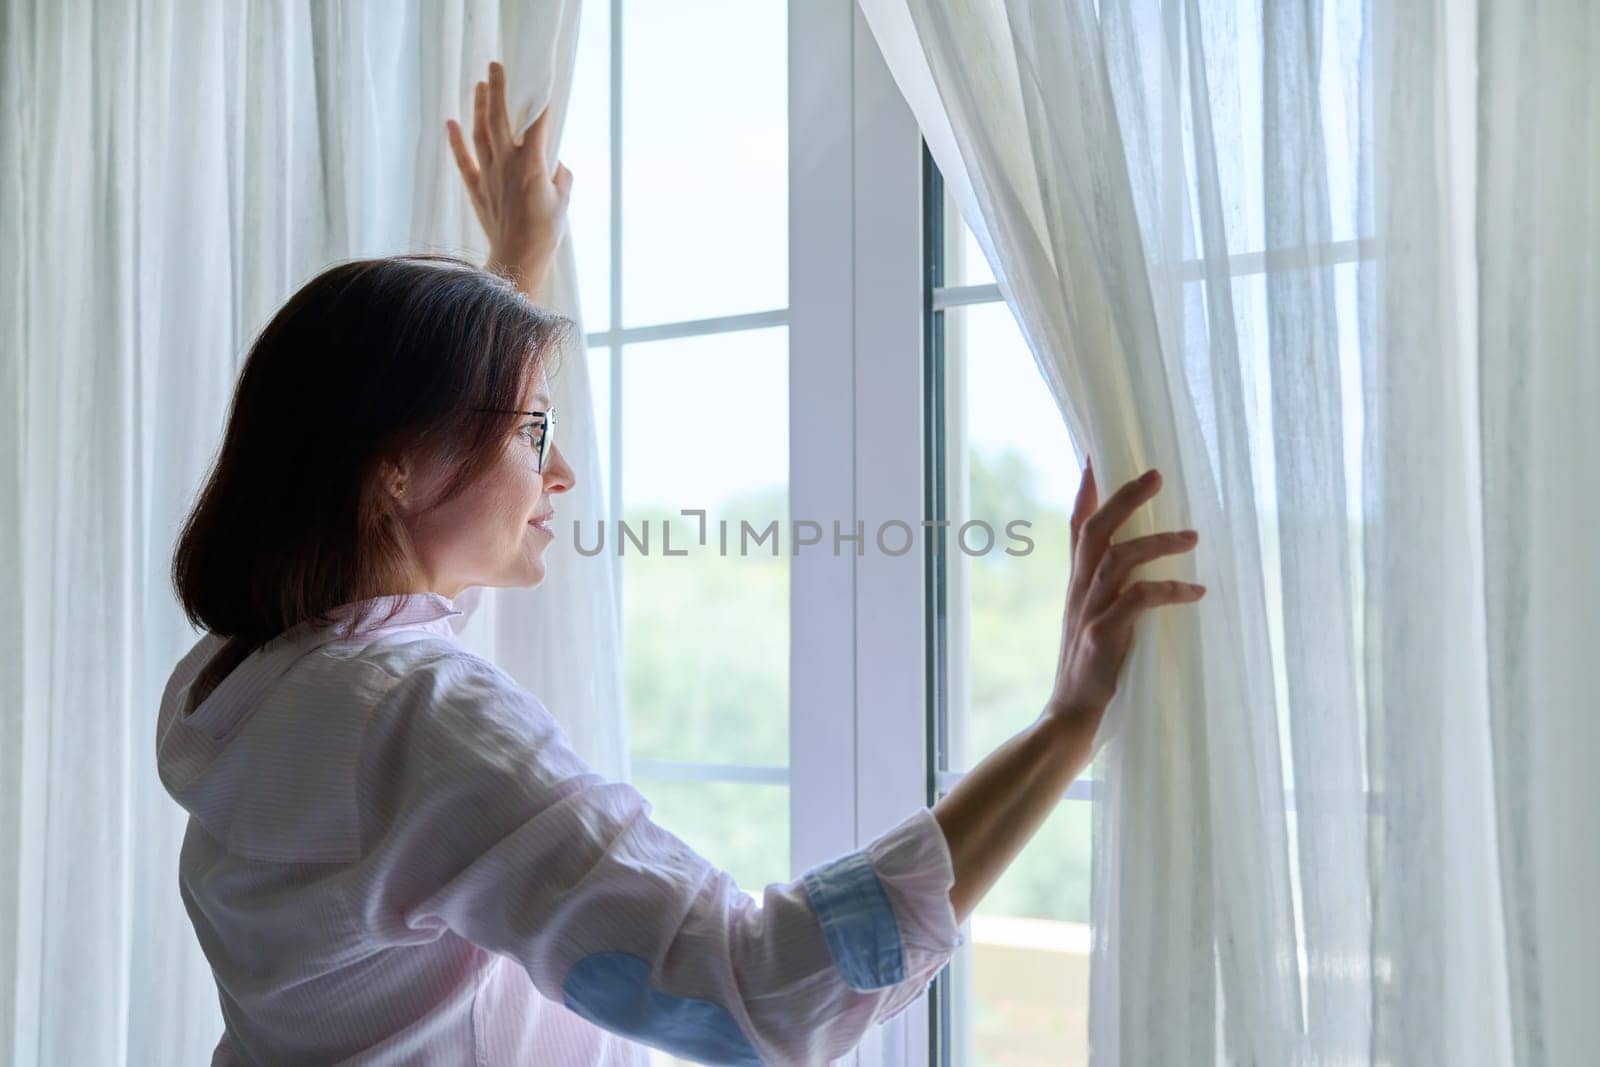 Smiling positive mature woman looking out the window. Happy 40s female standing near window at home